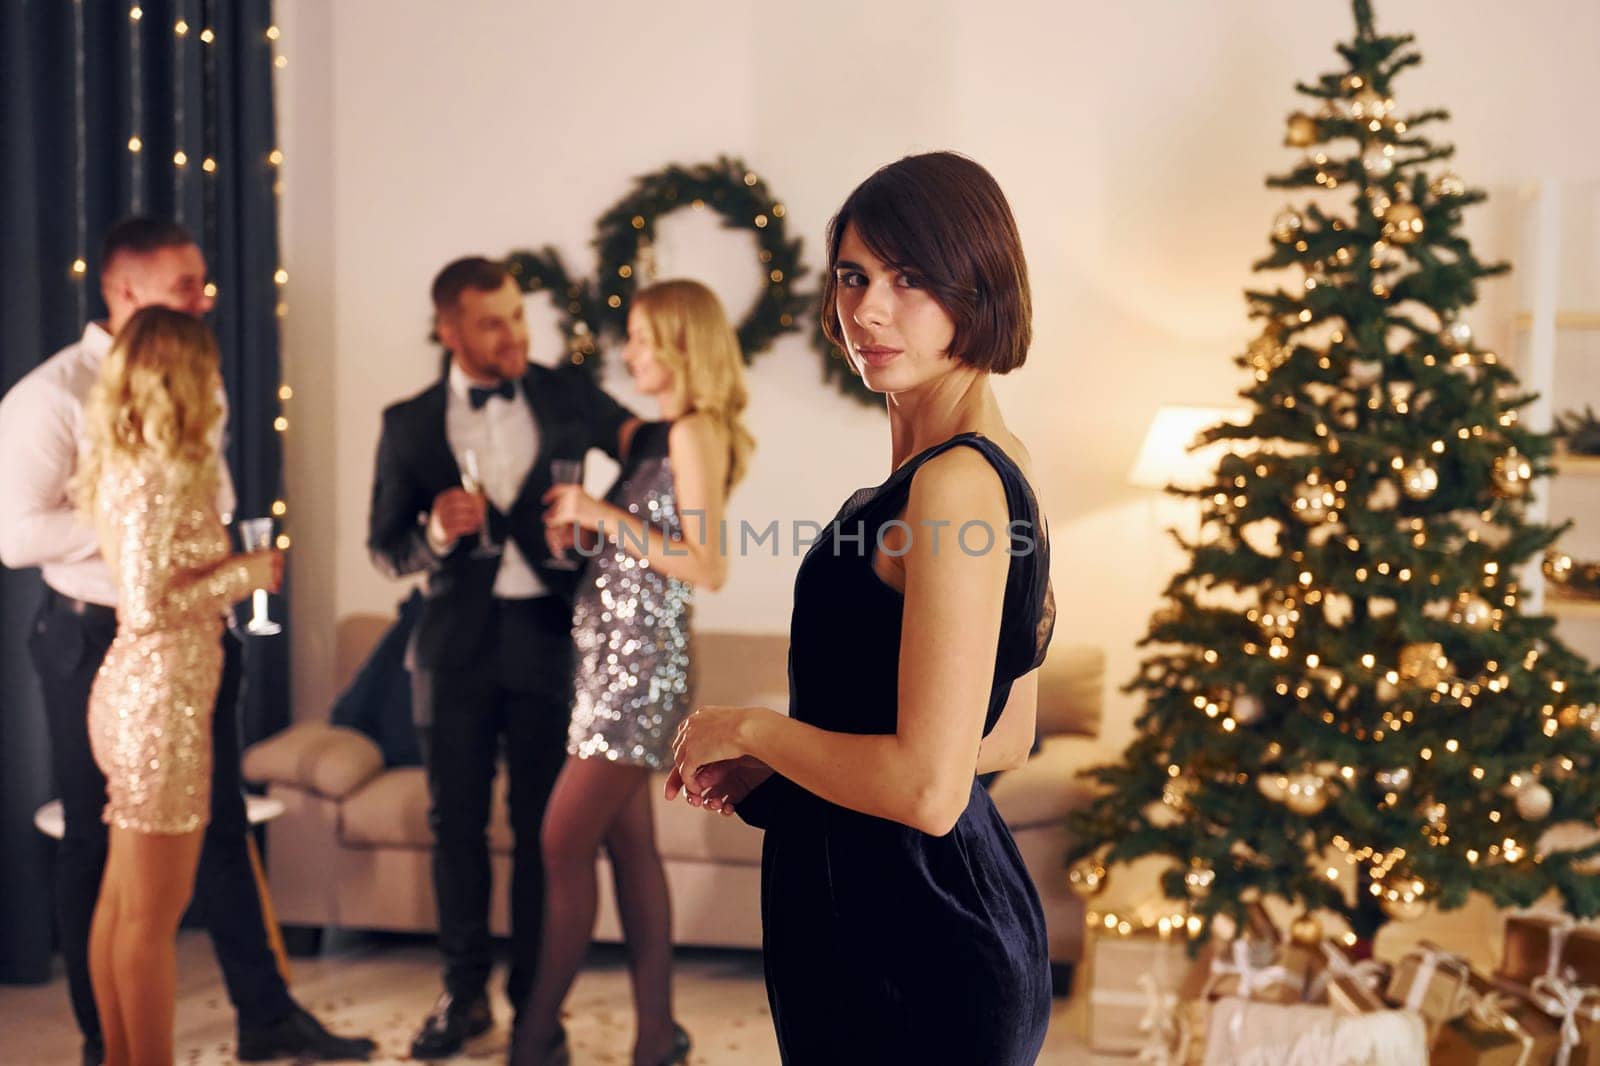 Standing near christmas tree. Group of people have a new year party indoors together.